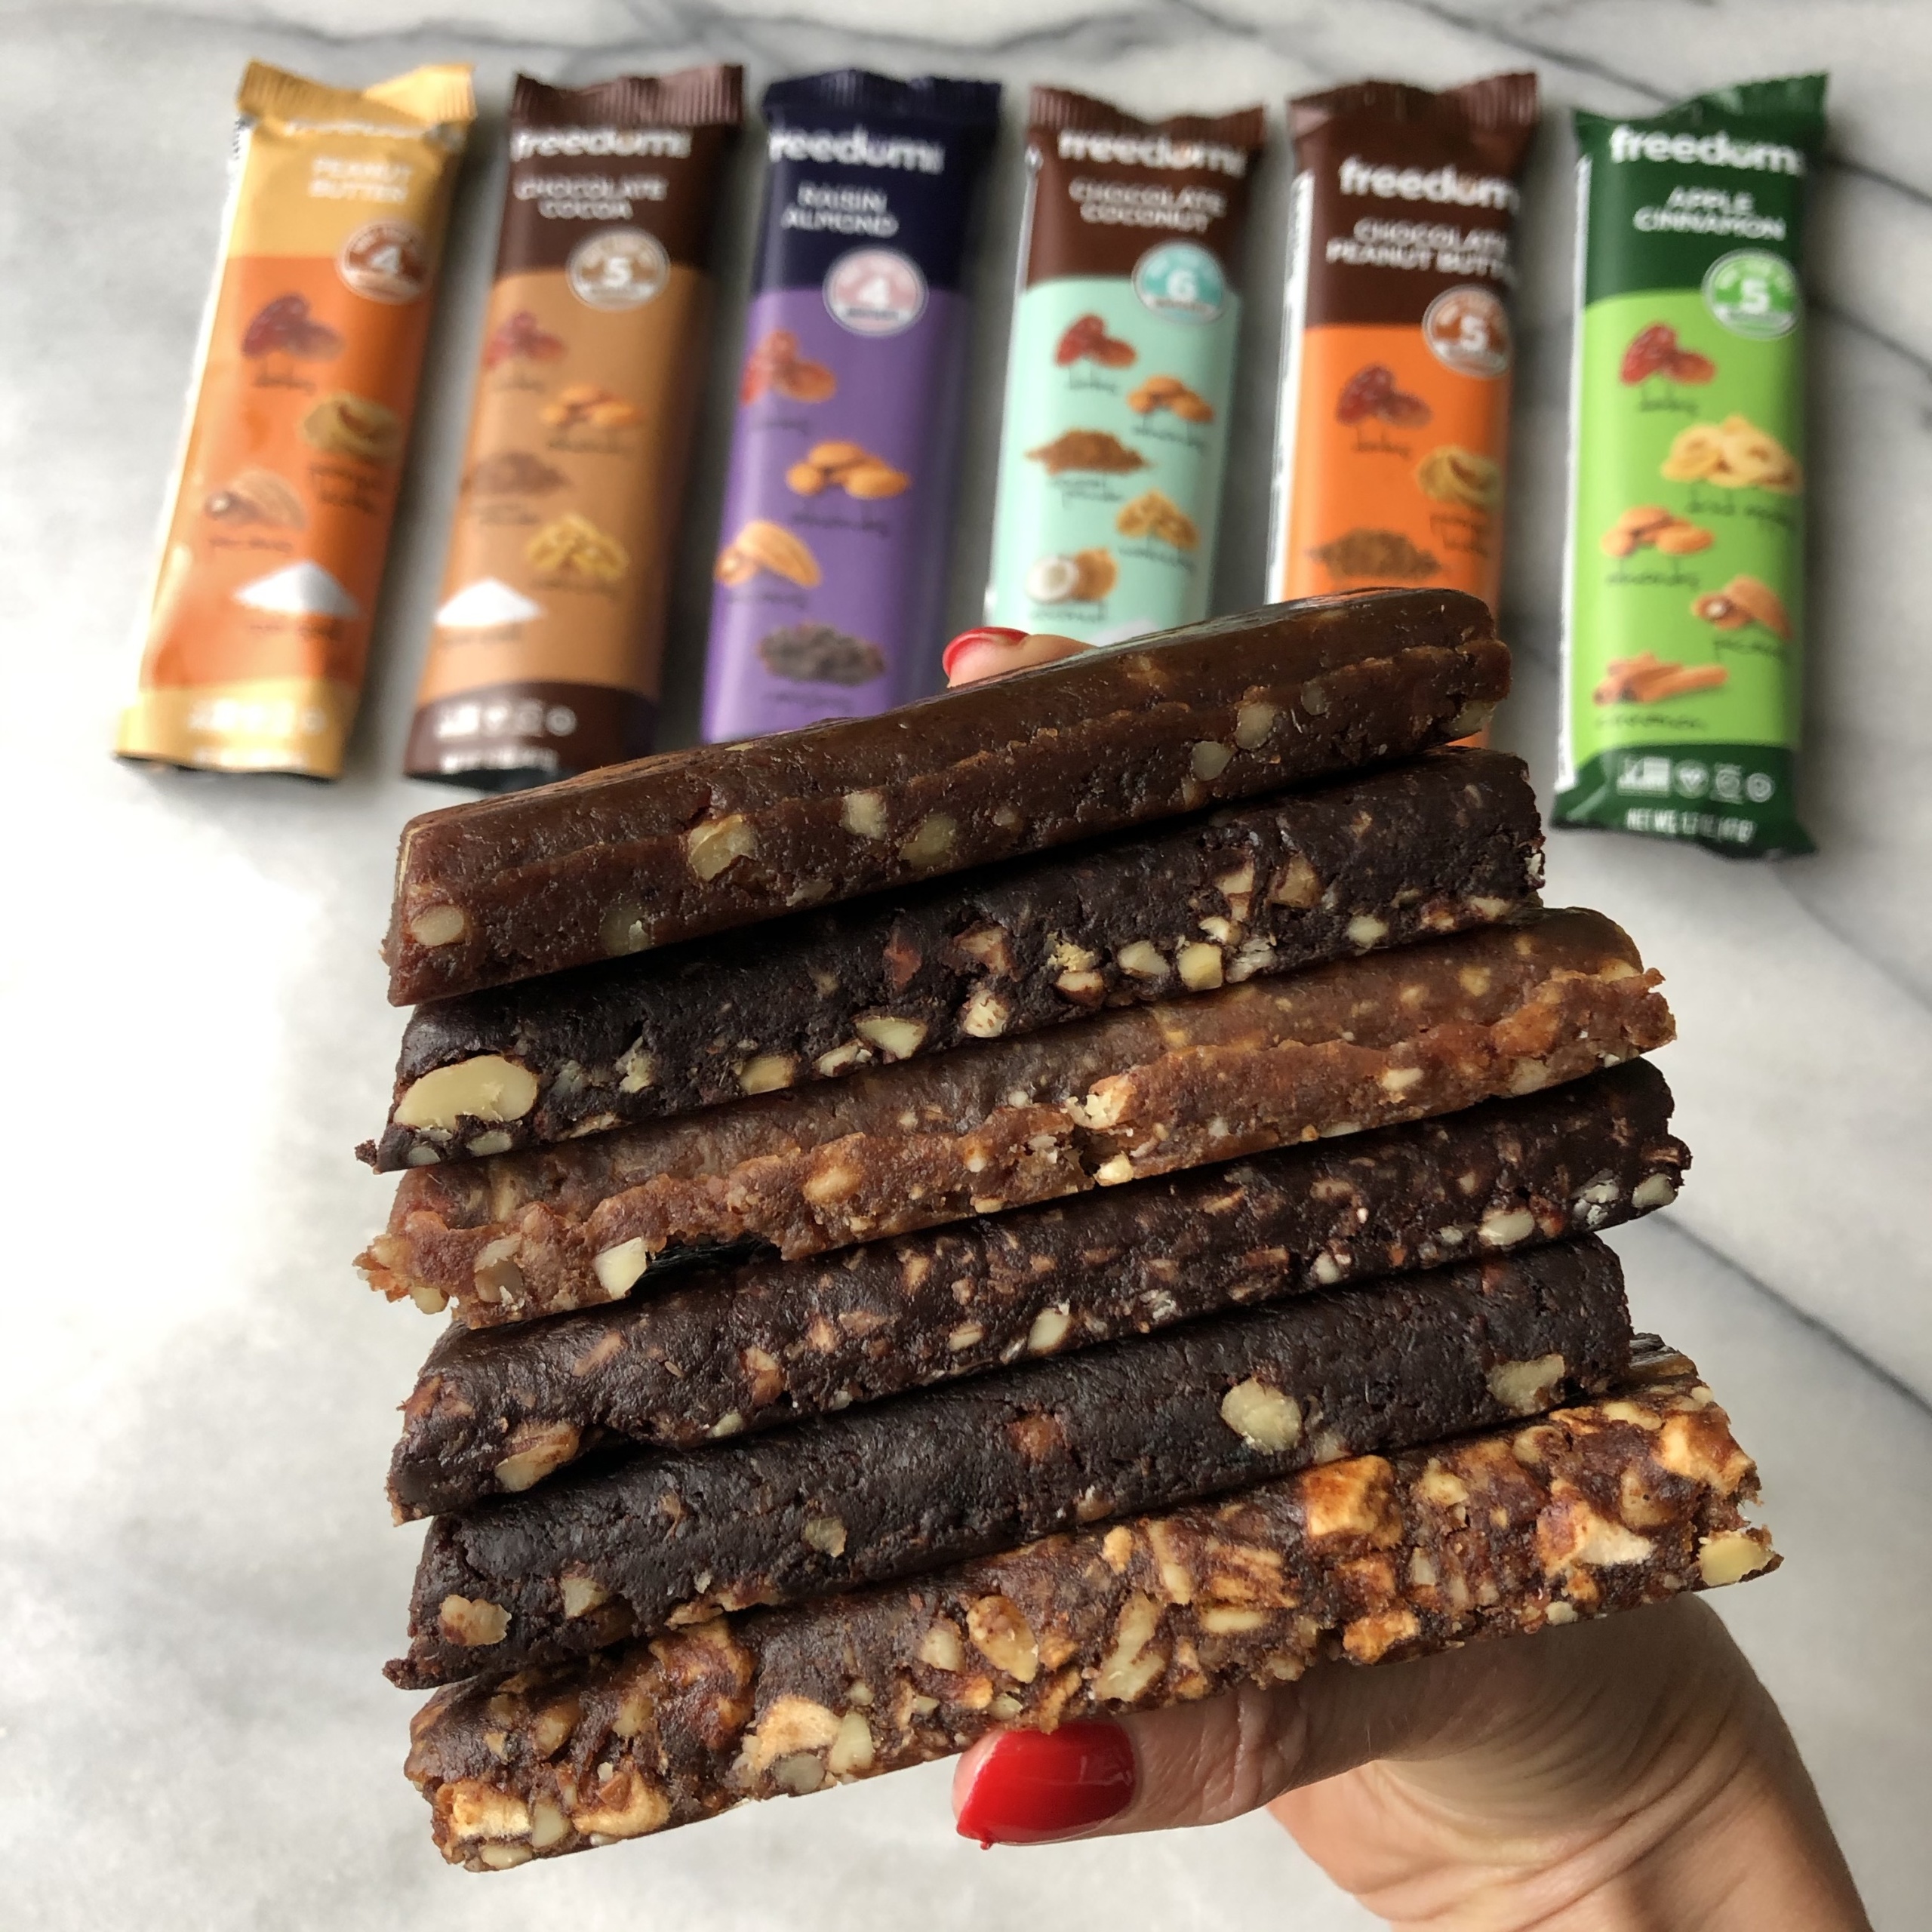 Stack of gluten-free bars by Freedom Bar